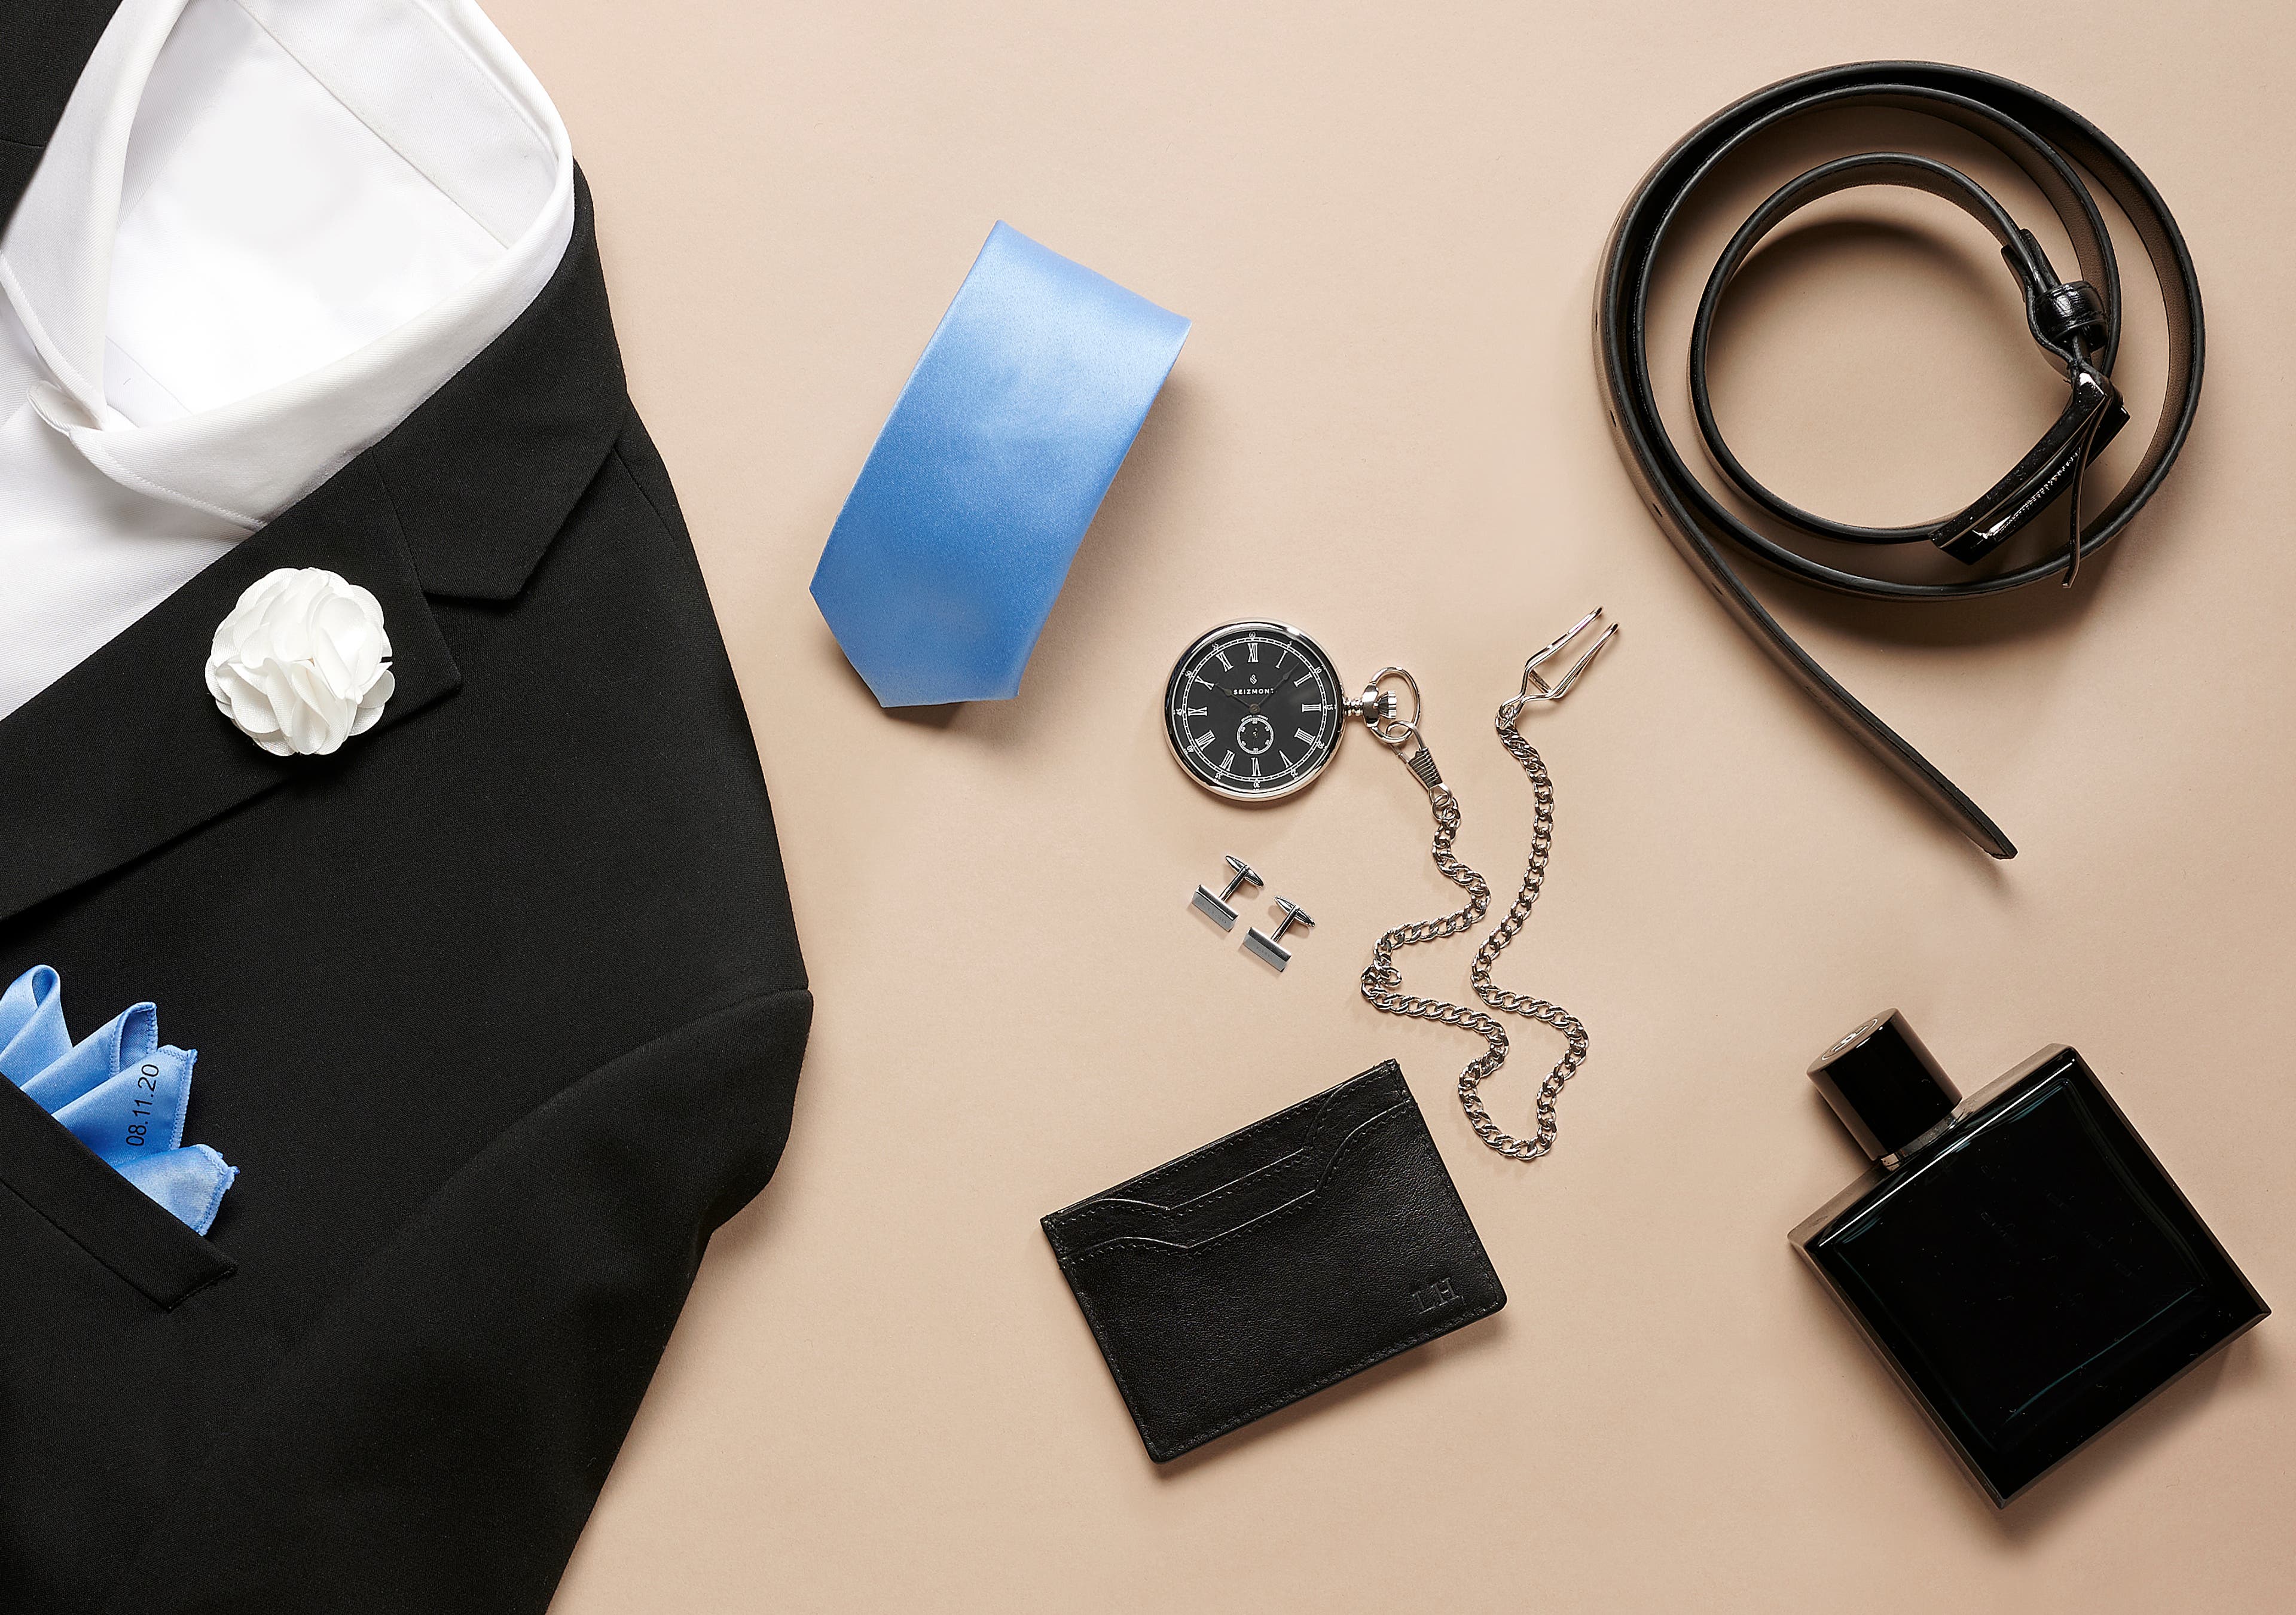 Personalized Accessories for Your Wedding Suit